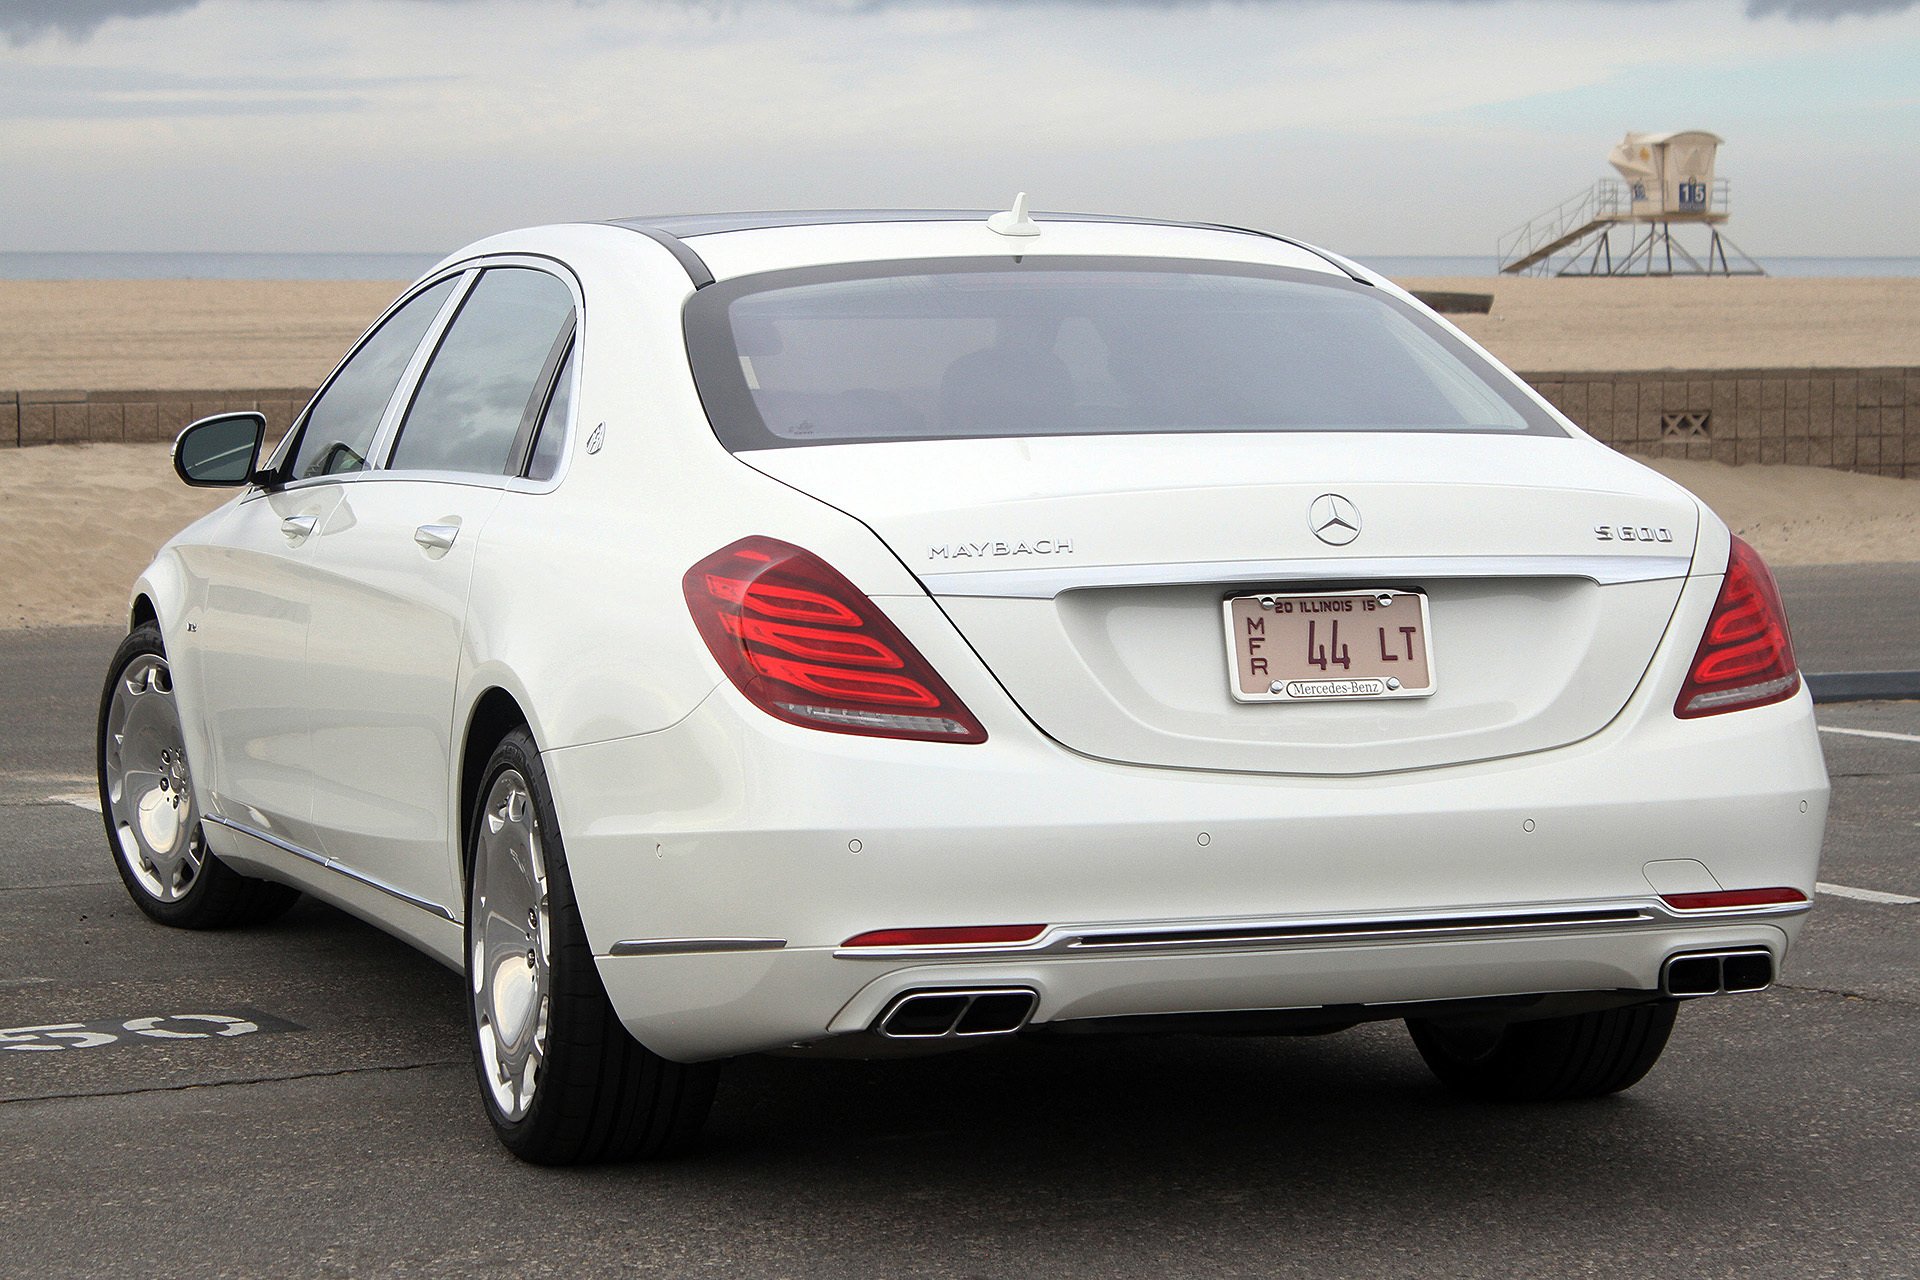 2016, Mercedes, Maybach, S600, Cars, Limo, Luxury Wallpaper